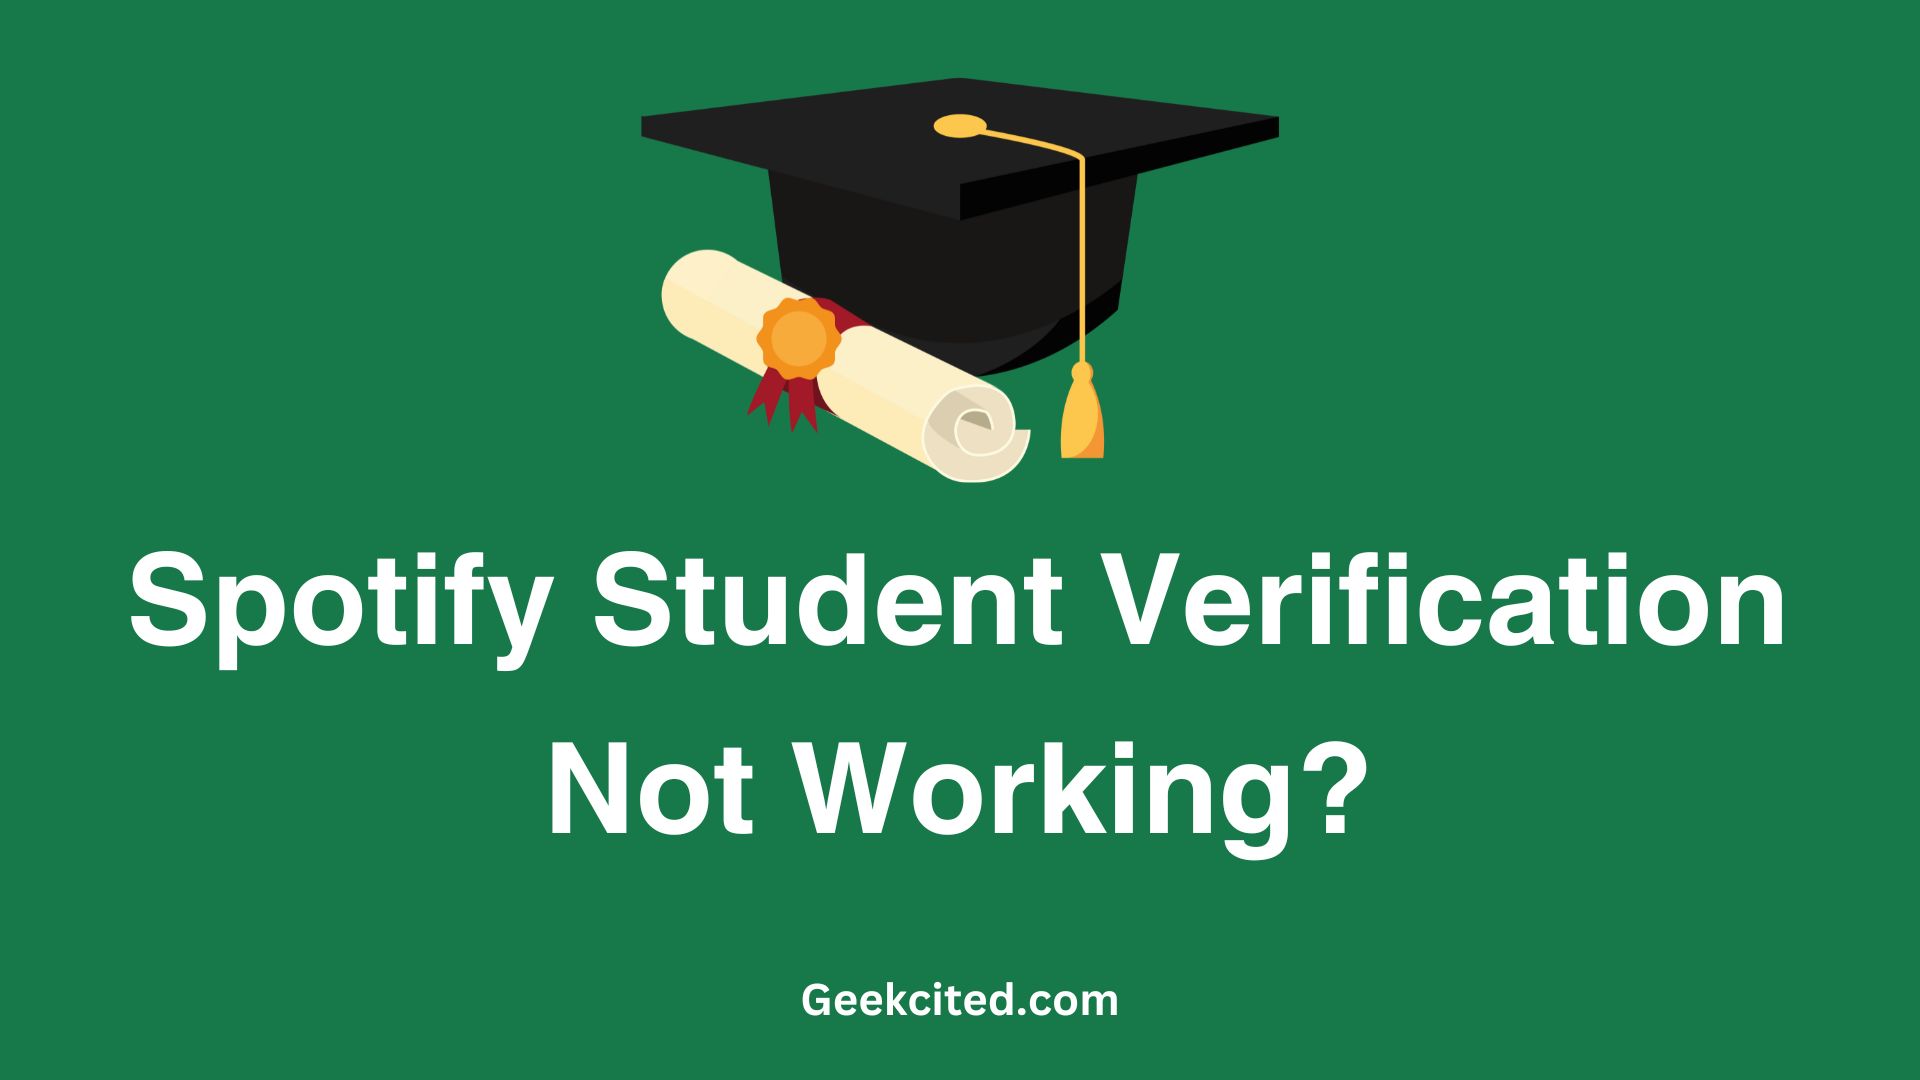 Spotify Student Verification Not Working